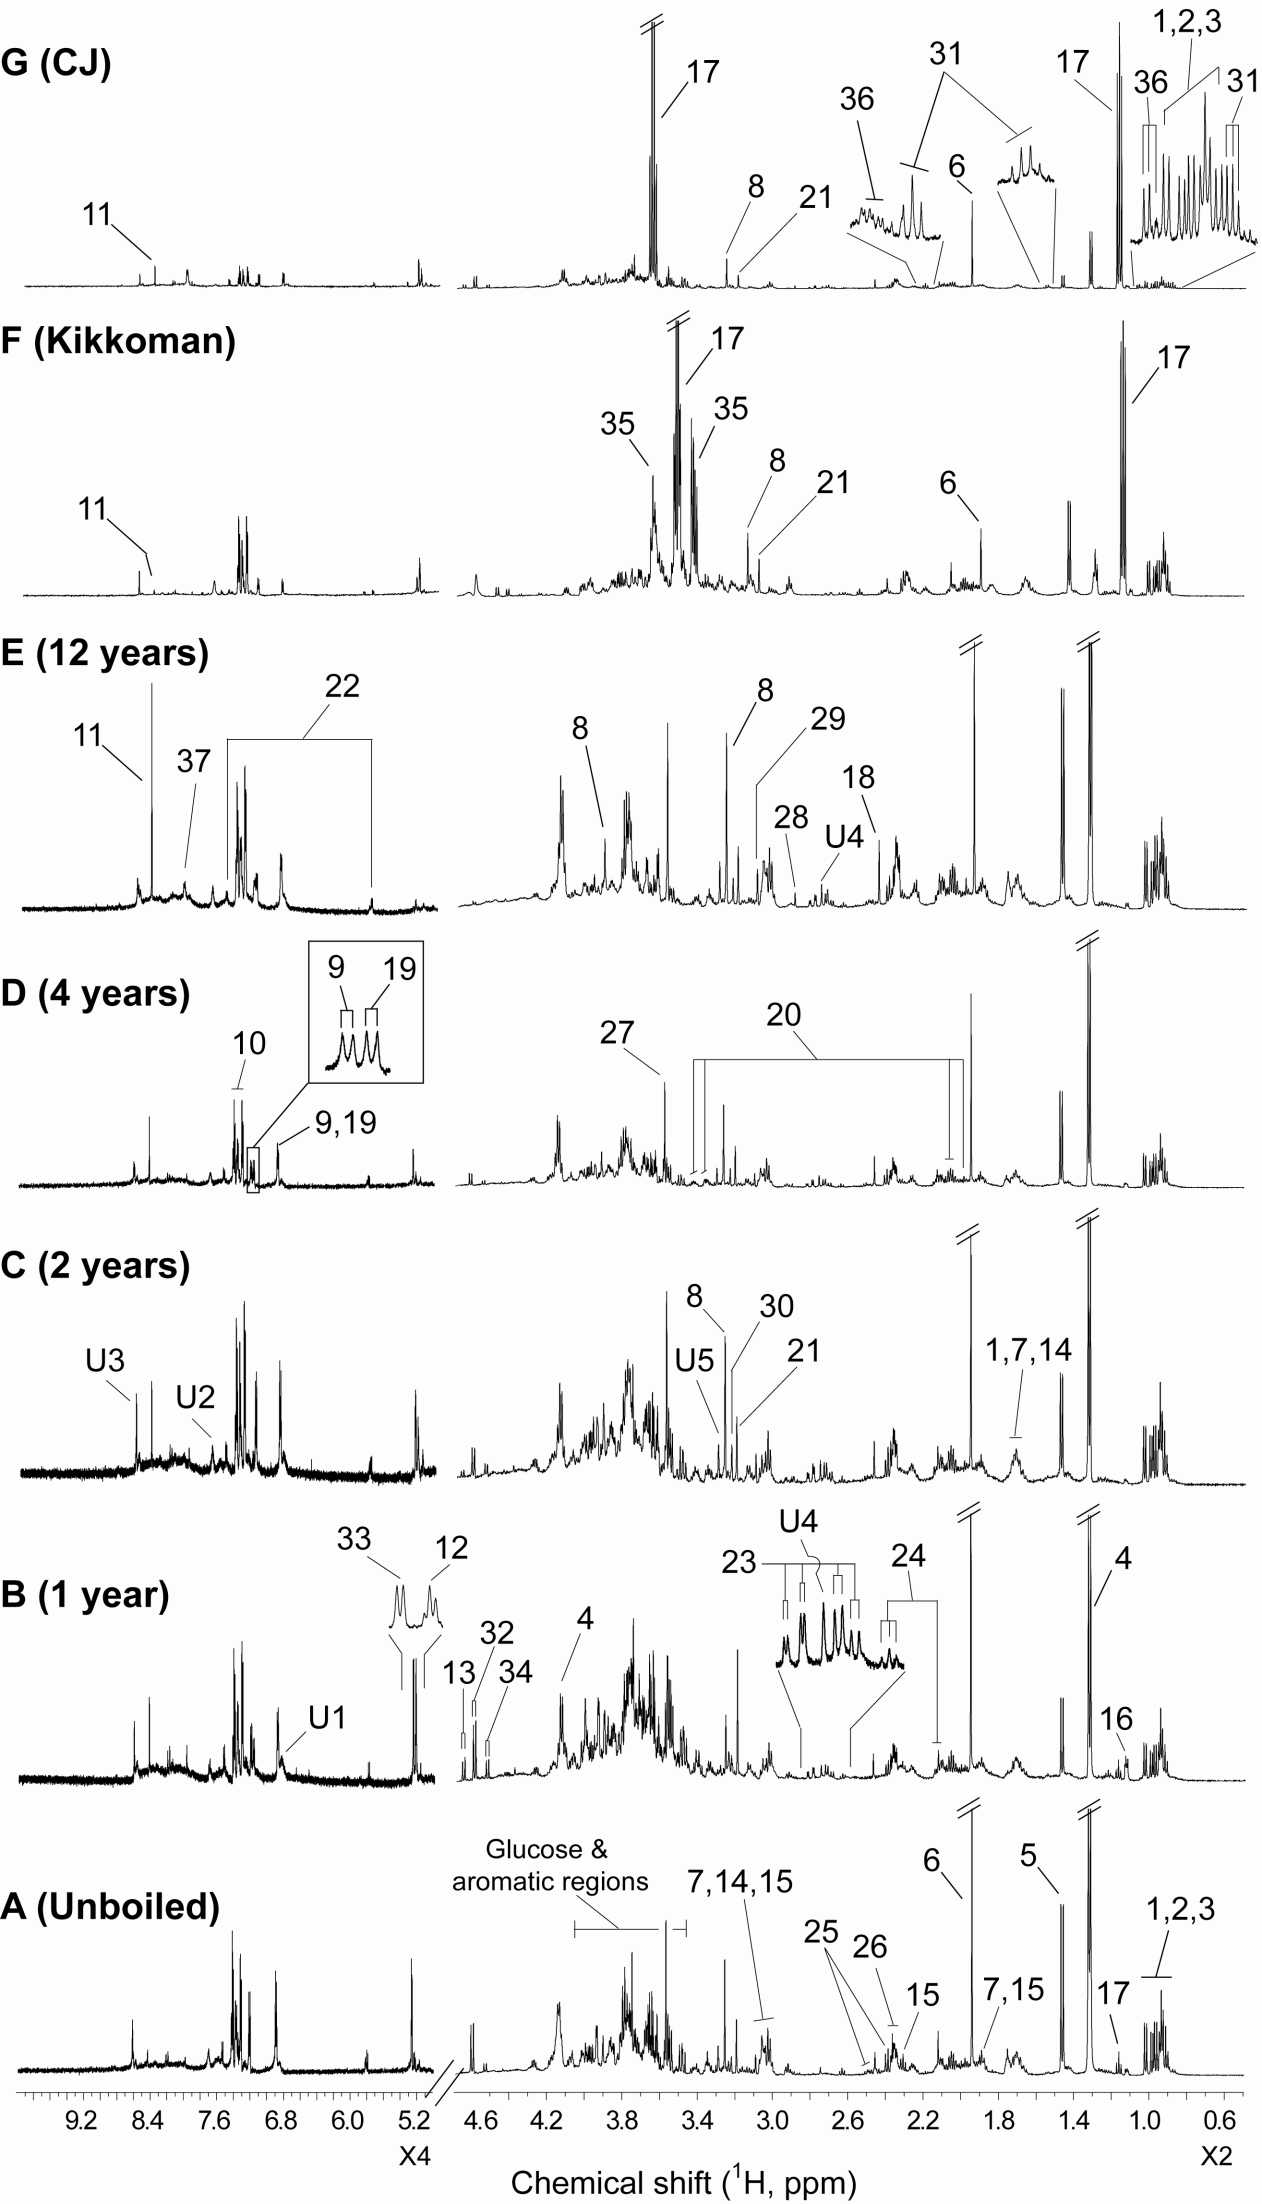 A typical 600MHz 1H NMR spectra of soy sauces unboiled (A) and aged for 1 year (B), 2 years (C), 4 years (D) and 12 years (E) obtained from traditional Korean manufacturer. F and G represent commerciallyavailable soy sauces obtained from CJ and Kikkoman, respectively. Unpasteurized soy sauces were aged for 1 year. Key: 1, leucine; 2, isoleucine; 3, valine; 4, lactate; 5, alanine; 6, acetate; 7, arginine; 8, betaine; 9, tyramine; 10, phenylalanine; 11, formate; 12, α-glucose; 13, β-glucose; 14, lysine; 15, γ-aminobutyrate (GABA); 16, fucose; 17, ethanol; 18, succinate; 19, tyrosine; 20, proline; 21, choline; 22, uracil; 23, aspartate; 24, methionine; 25, pyroglutamate; 26, glutamate; 27, glycine; 28, trimethylamine; 29, malonate; 30, phosphocholine; 31, butyrate; 32, oligosaccharide (O1); 33, oligosaccharide (O2); 34, oligosaccharide (O3); 35, glycerol; 36, propionate; 37, hypoxanthine; U1, U2, U3, U4 and U5, unknown